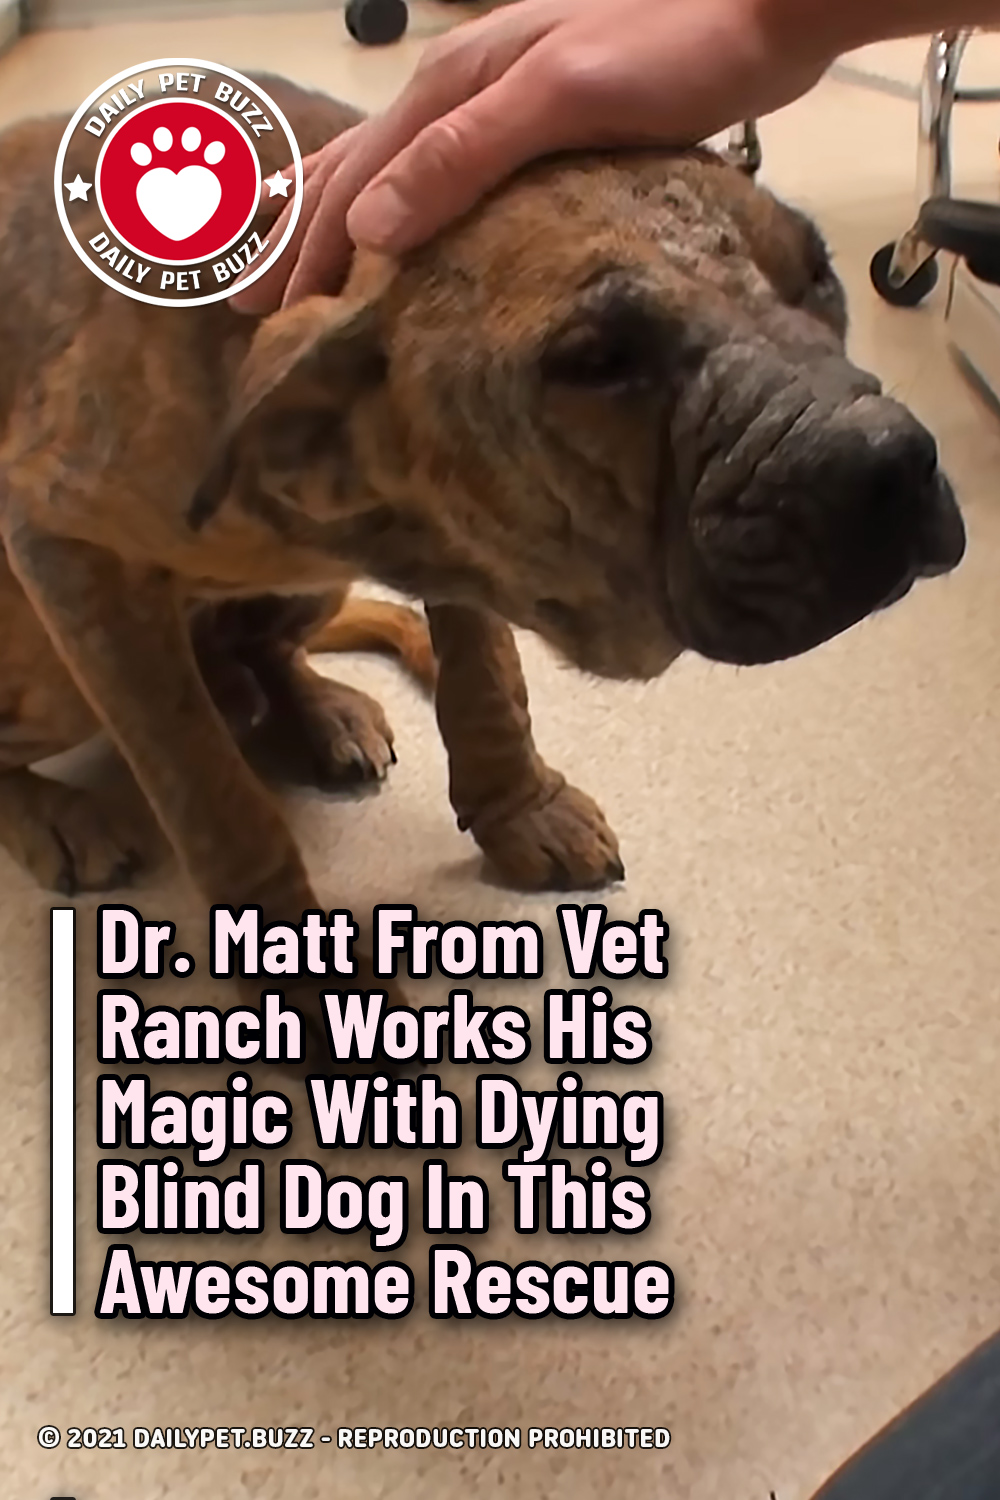 Dr. Matt From Vet Ranch Works His Magic With Dying Blind Dog In This Awesome Rescue